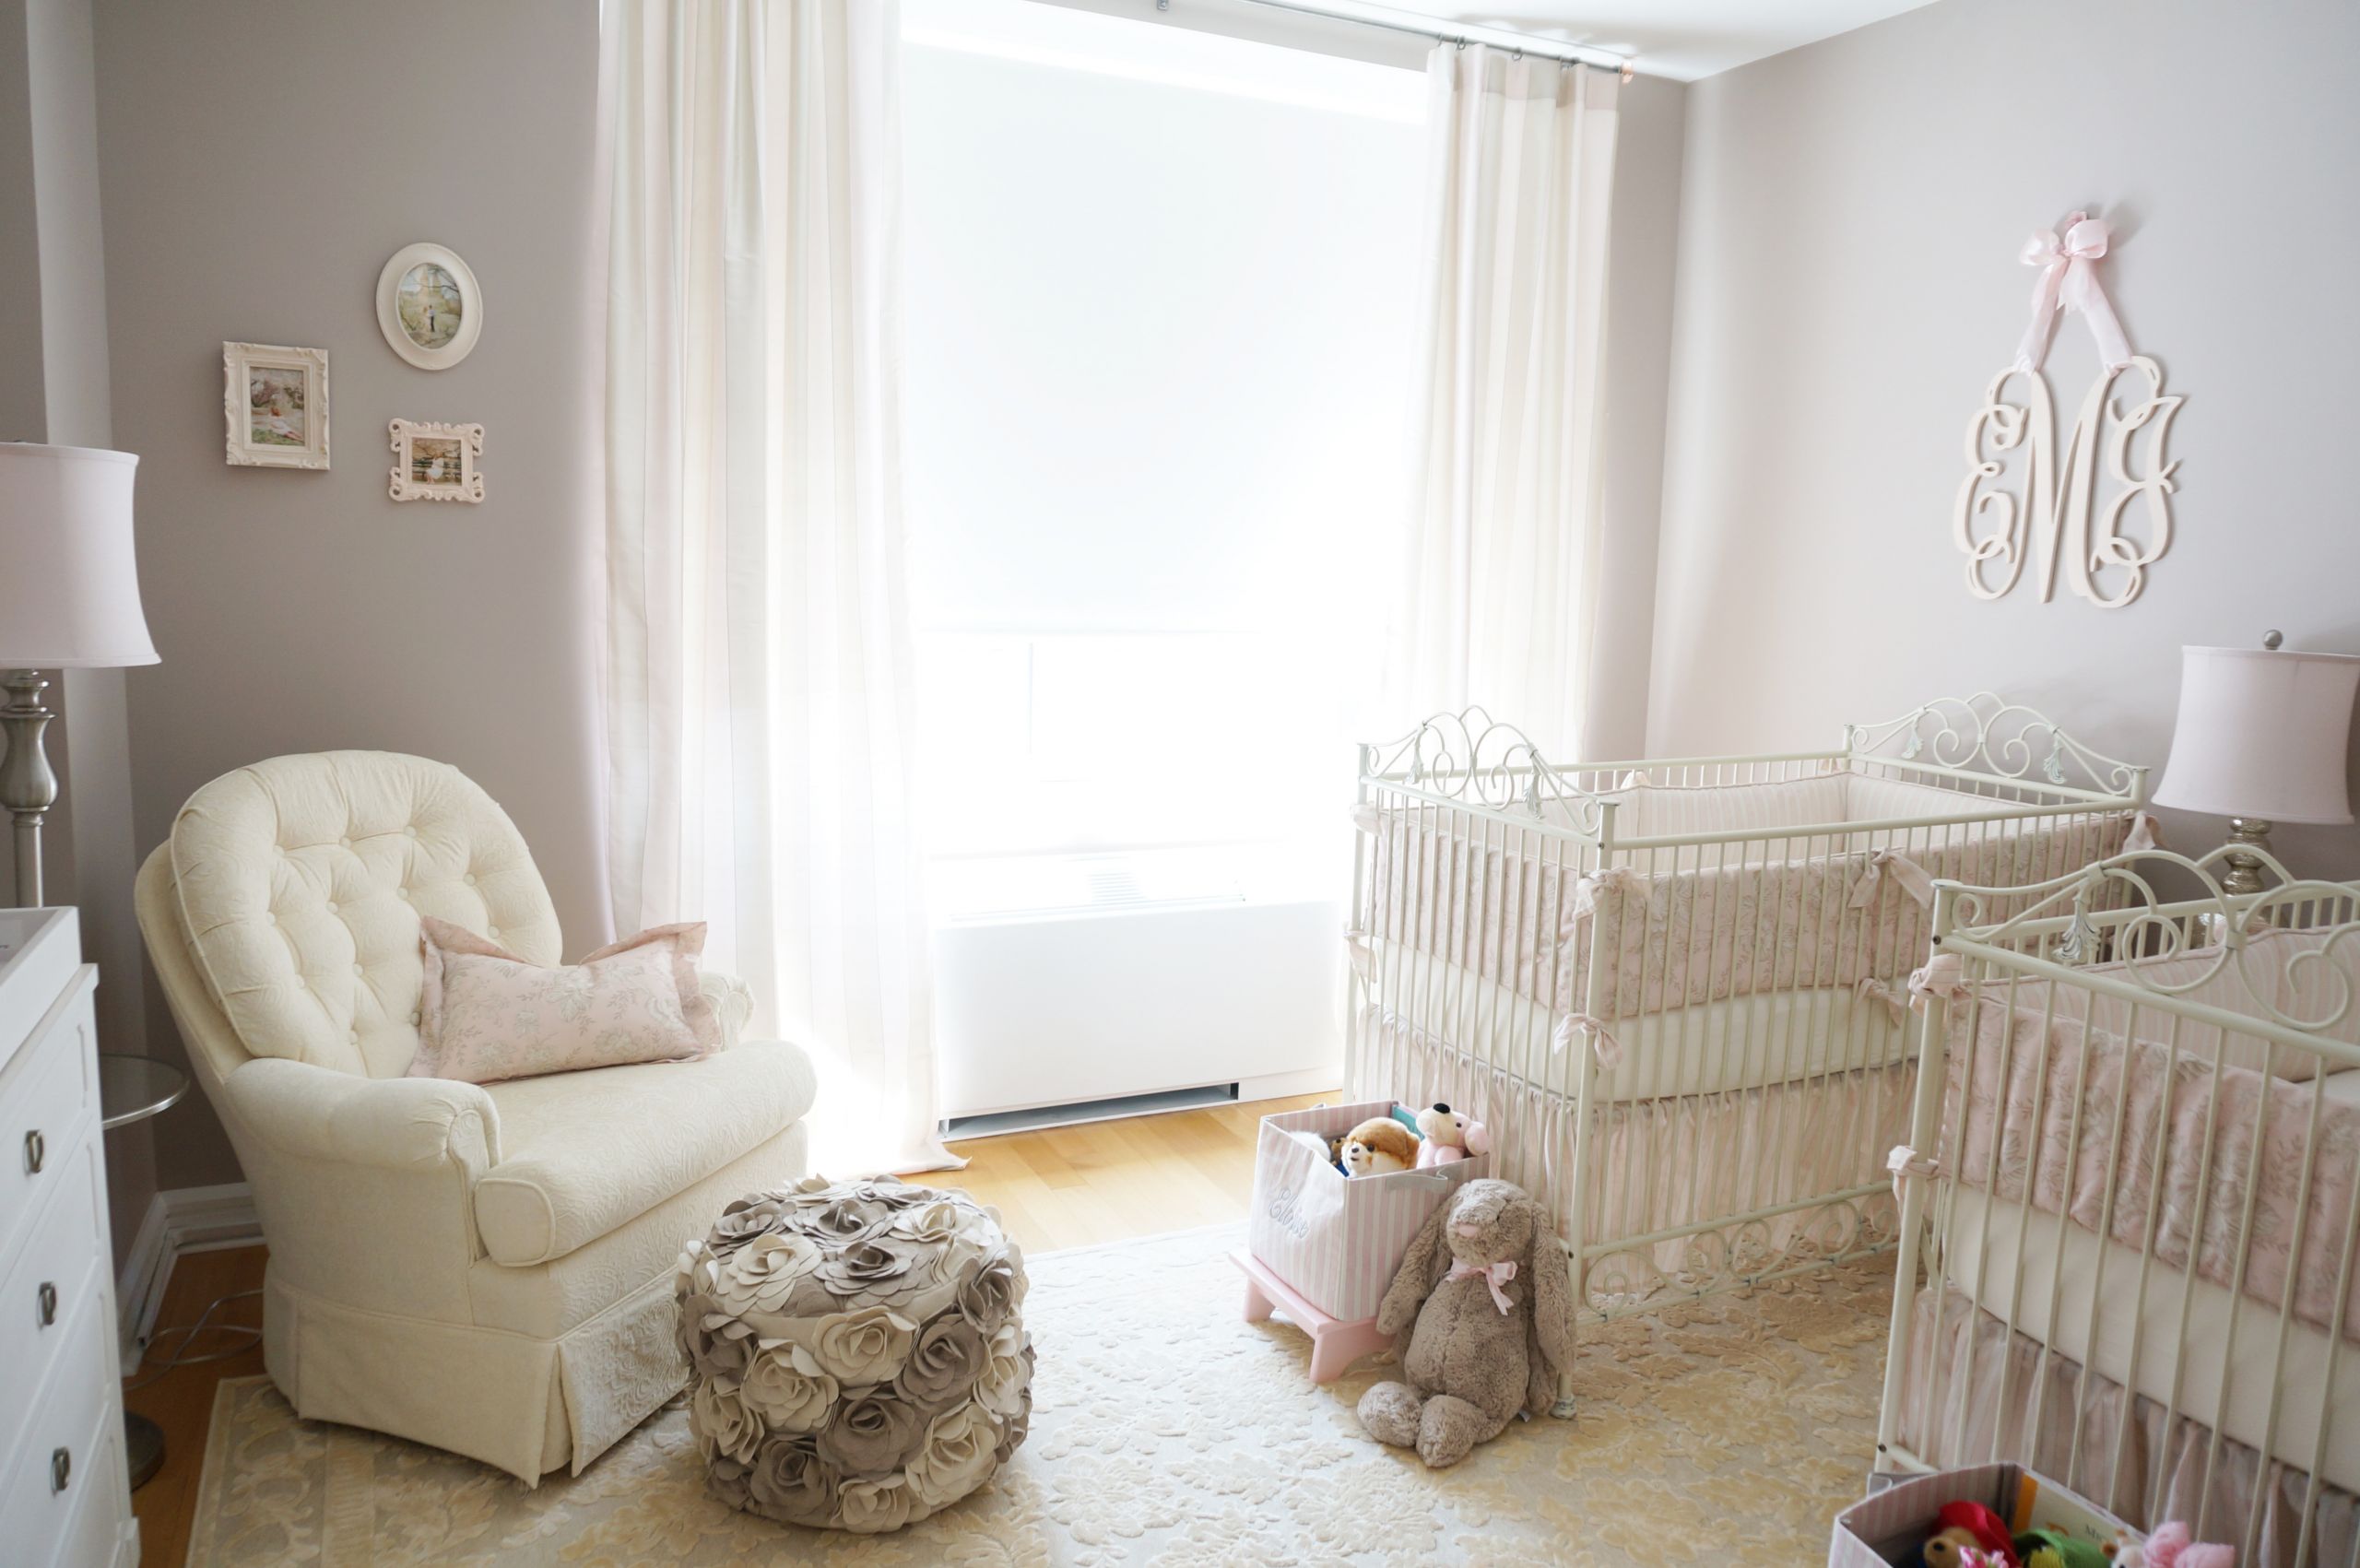 Twins Baby Room Decorating Ideas
 Pink Ivory and Grey Twin Girls Nursery Project Nursery